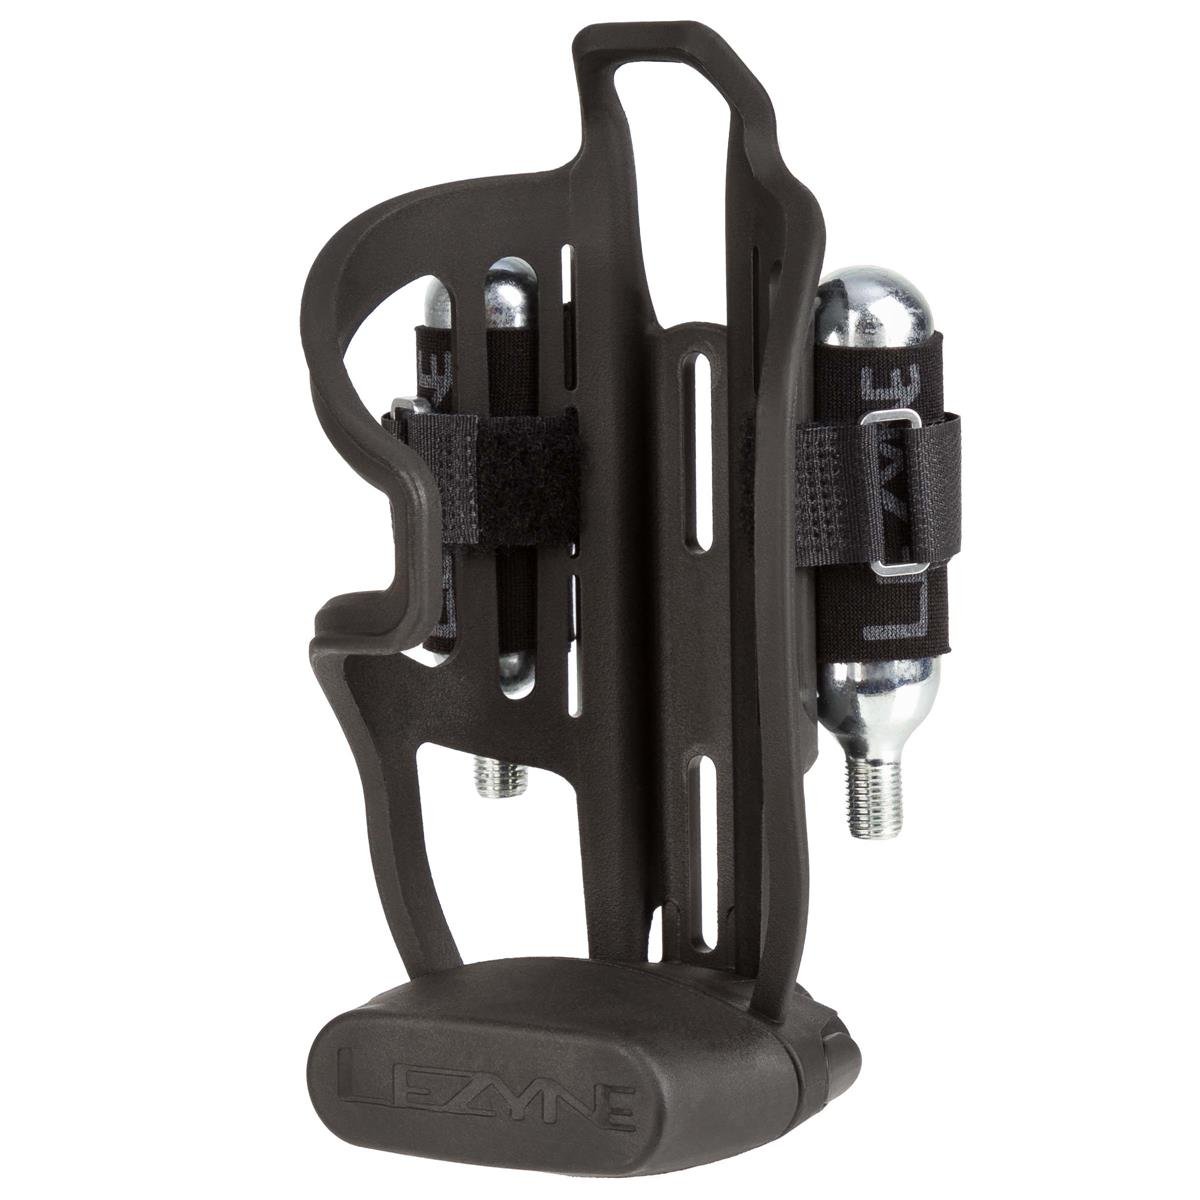 Lezyne Bottle Cage Flow Storage Cage integrated Storage Container, Tool and CO2 Cartridge, Black